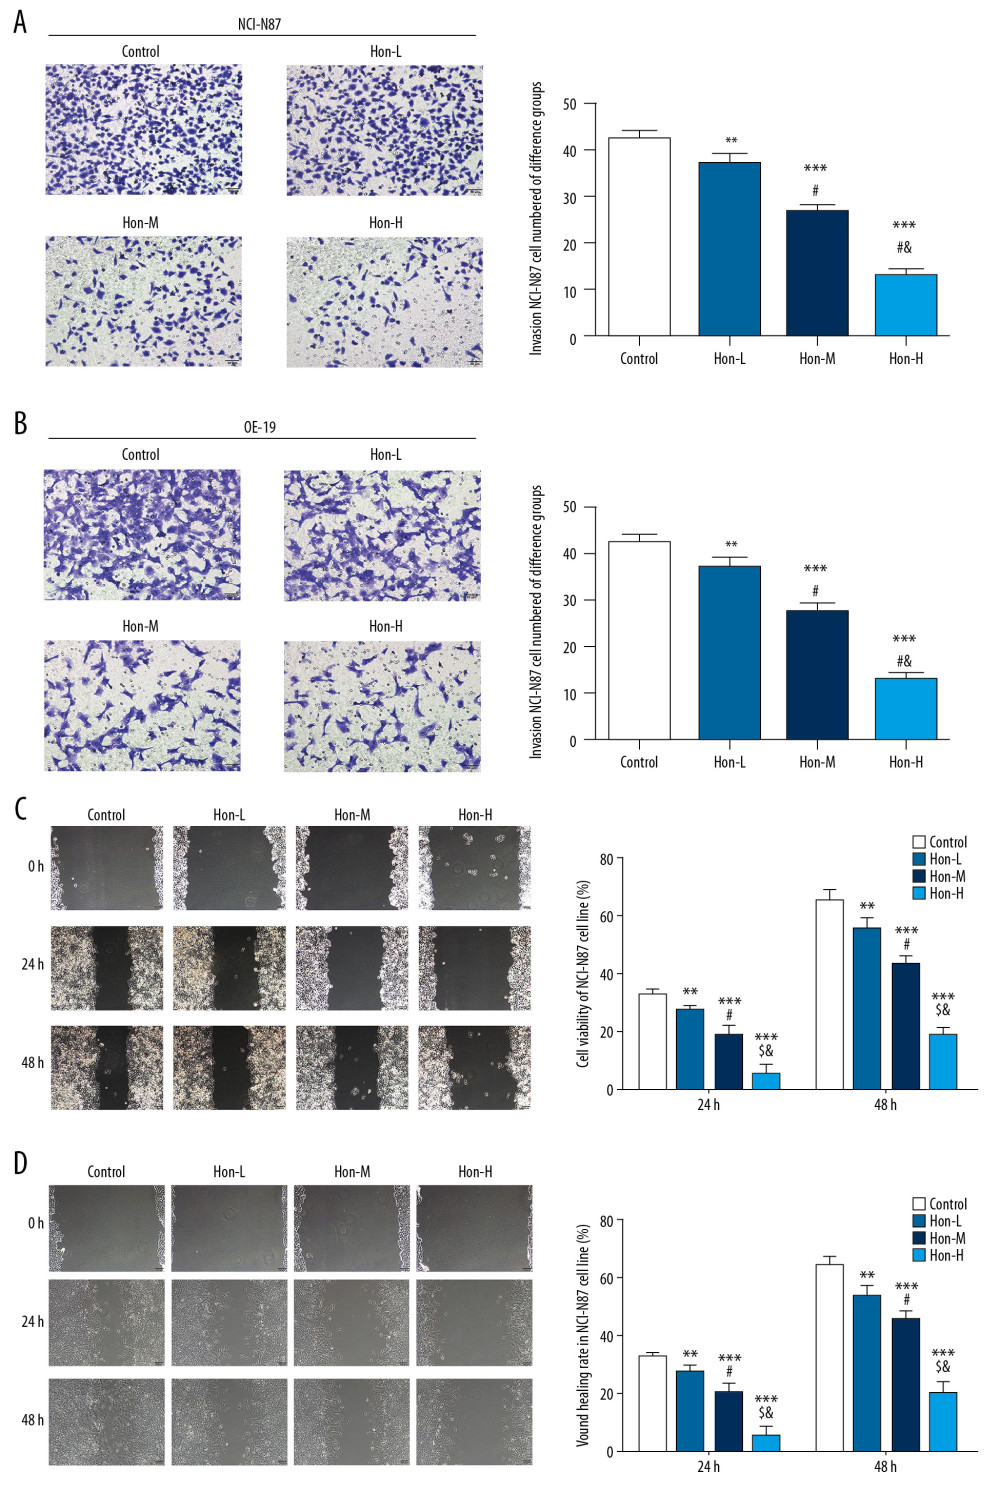 Honokiol (Hon) affects cell invasion and wound-healing rate in NCI-N87 and OE-19 cell lines. Control: Untreated cells. Hon-L: Cells treated with low-dose Hon. Hon-M: Cells treated with middle-dose Hon. Hon-H: Cells treated with high-dose Hon. Invading cell numbers of different groups in NCI-N87 cell line (A) and in OE-19 cell line (B) by transwell assay (200×). Wound-healing rate of different groups in NCI-N87 cell line (C) and in OE-19 cell line (D) by wound-healing assay (100×). ** P<0.01, *** P<0.001 compared with control group; # P<0.05 compared with Hon-L group; & P<0.05 compared with Hon-M group.